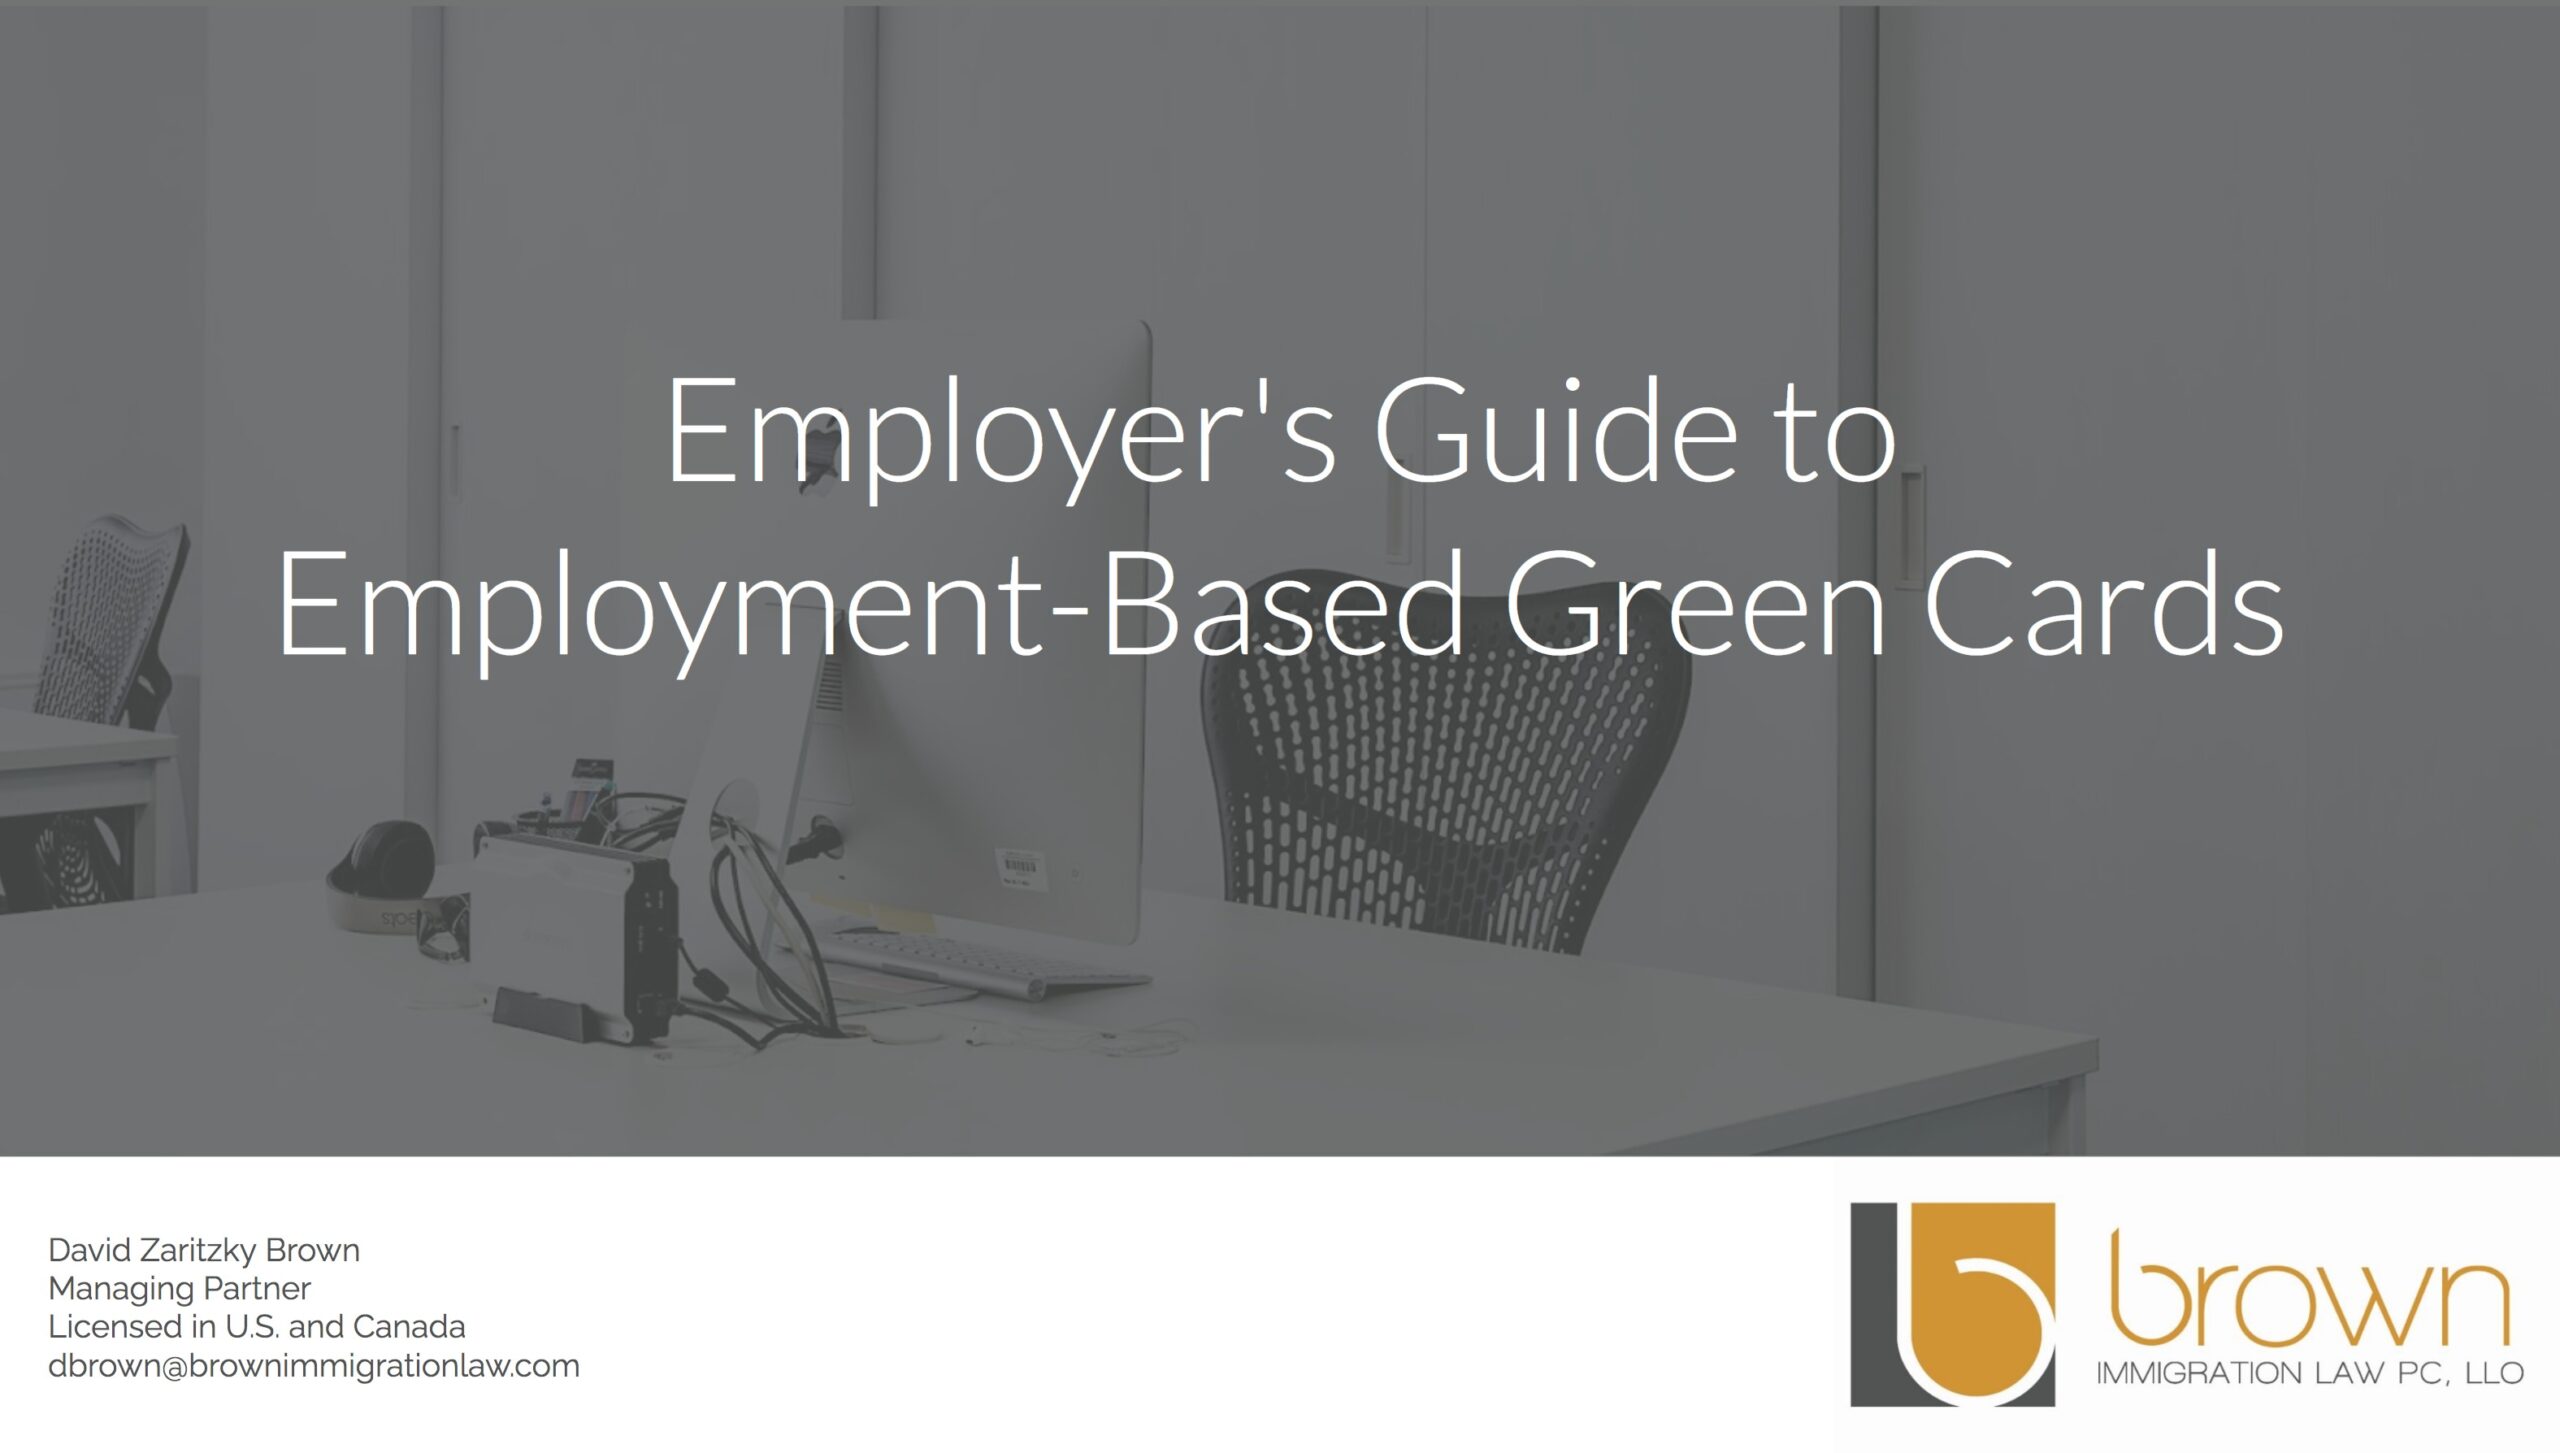 Employer's Guide to Employment-Based Green Cards